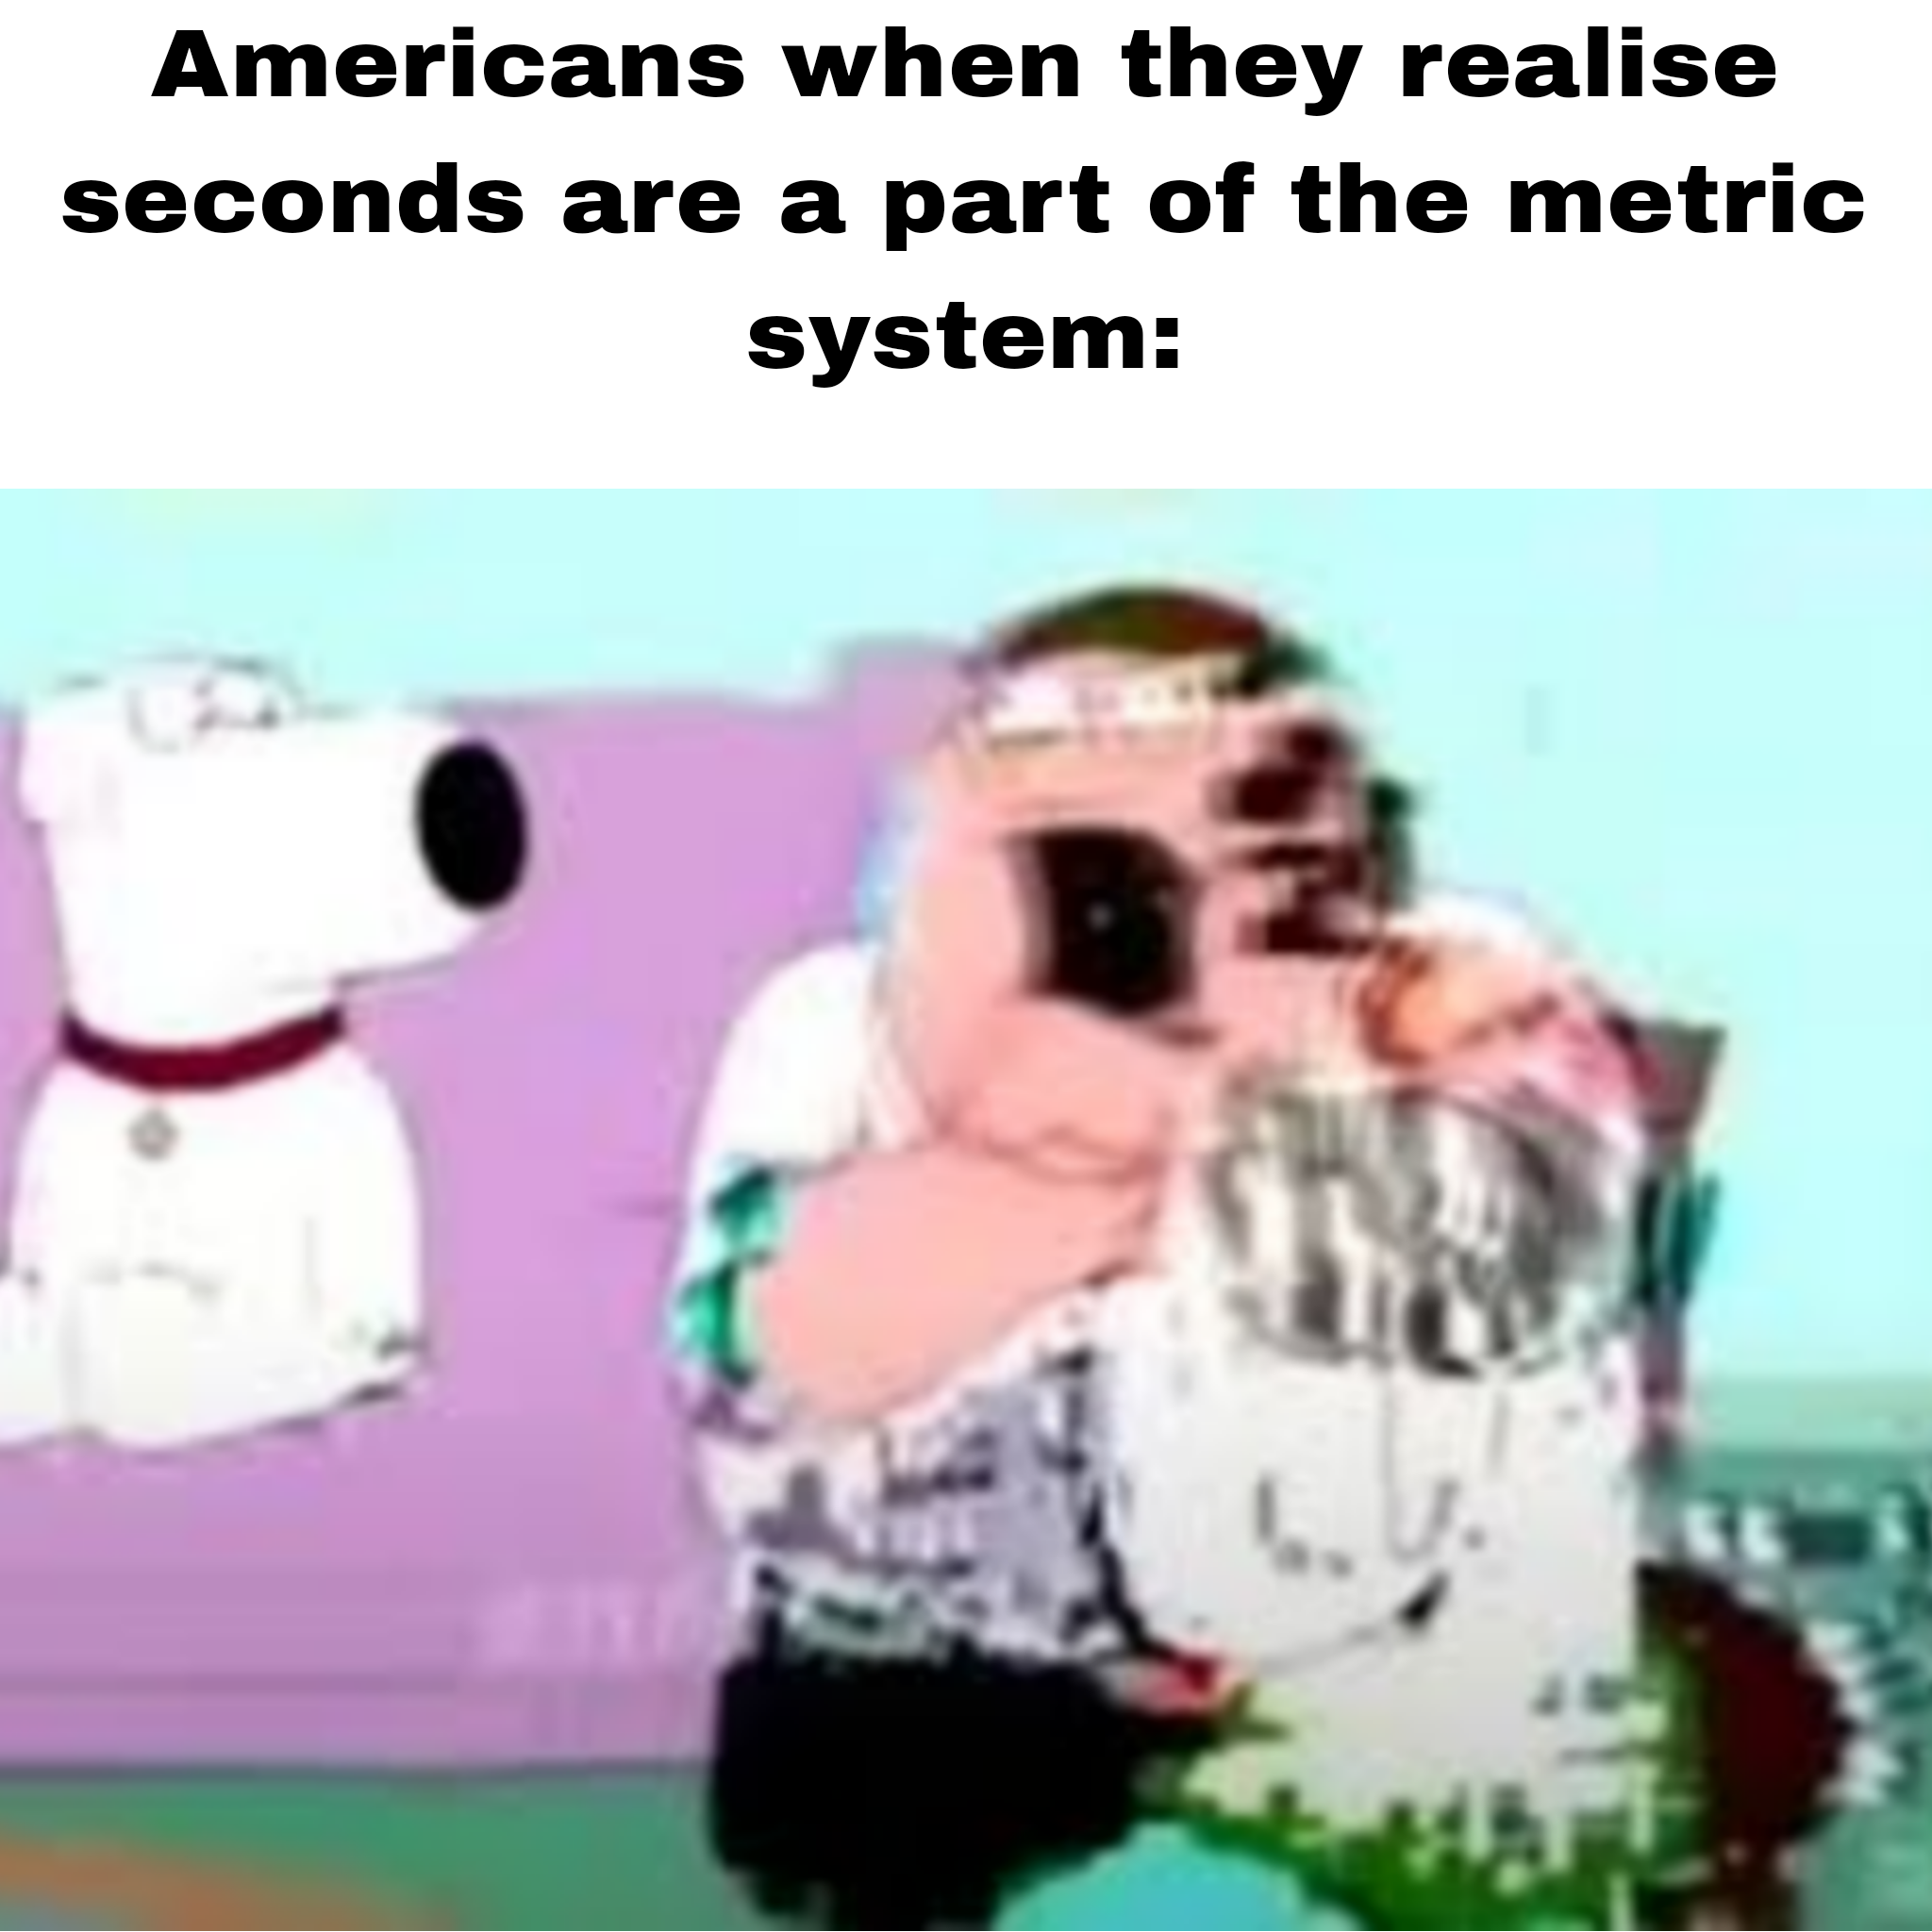 Americans when seconds